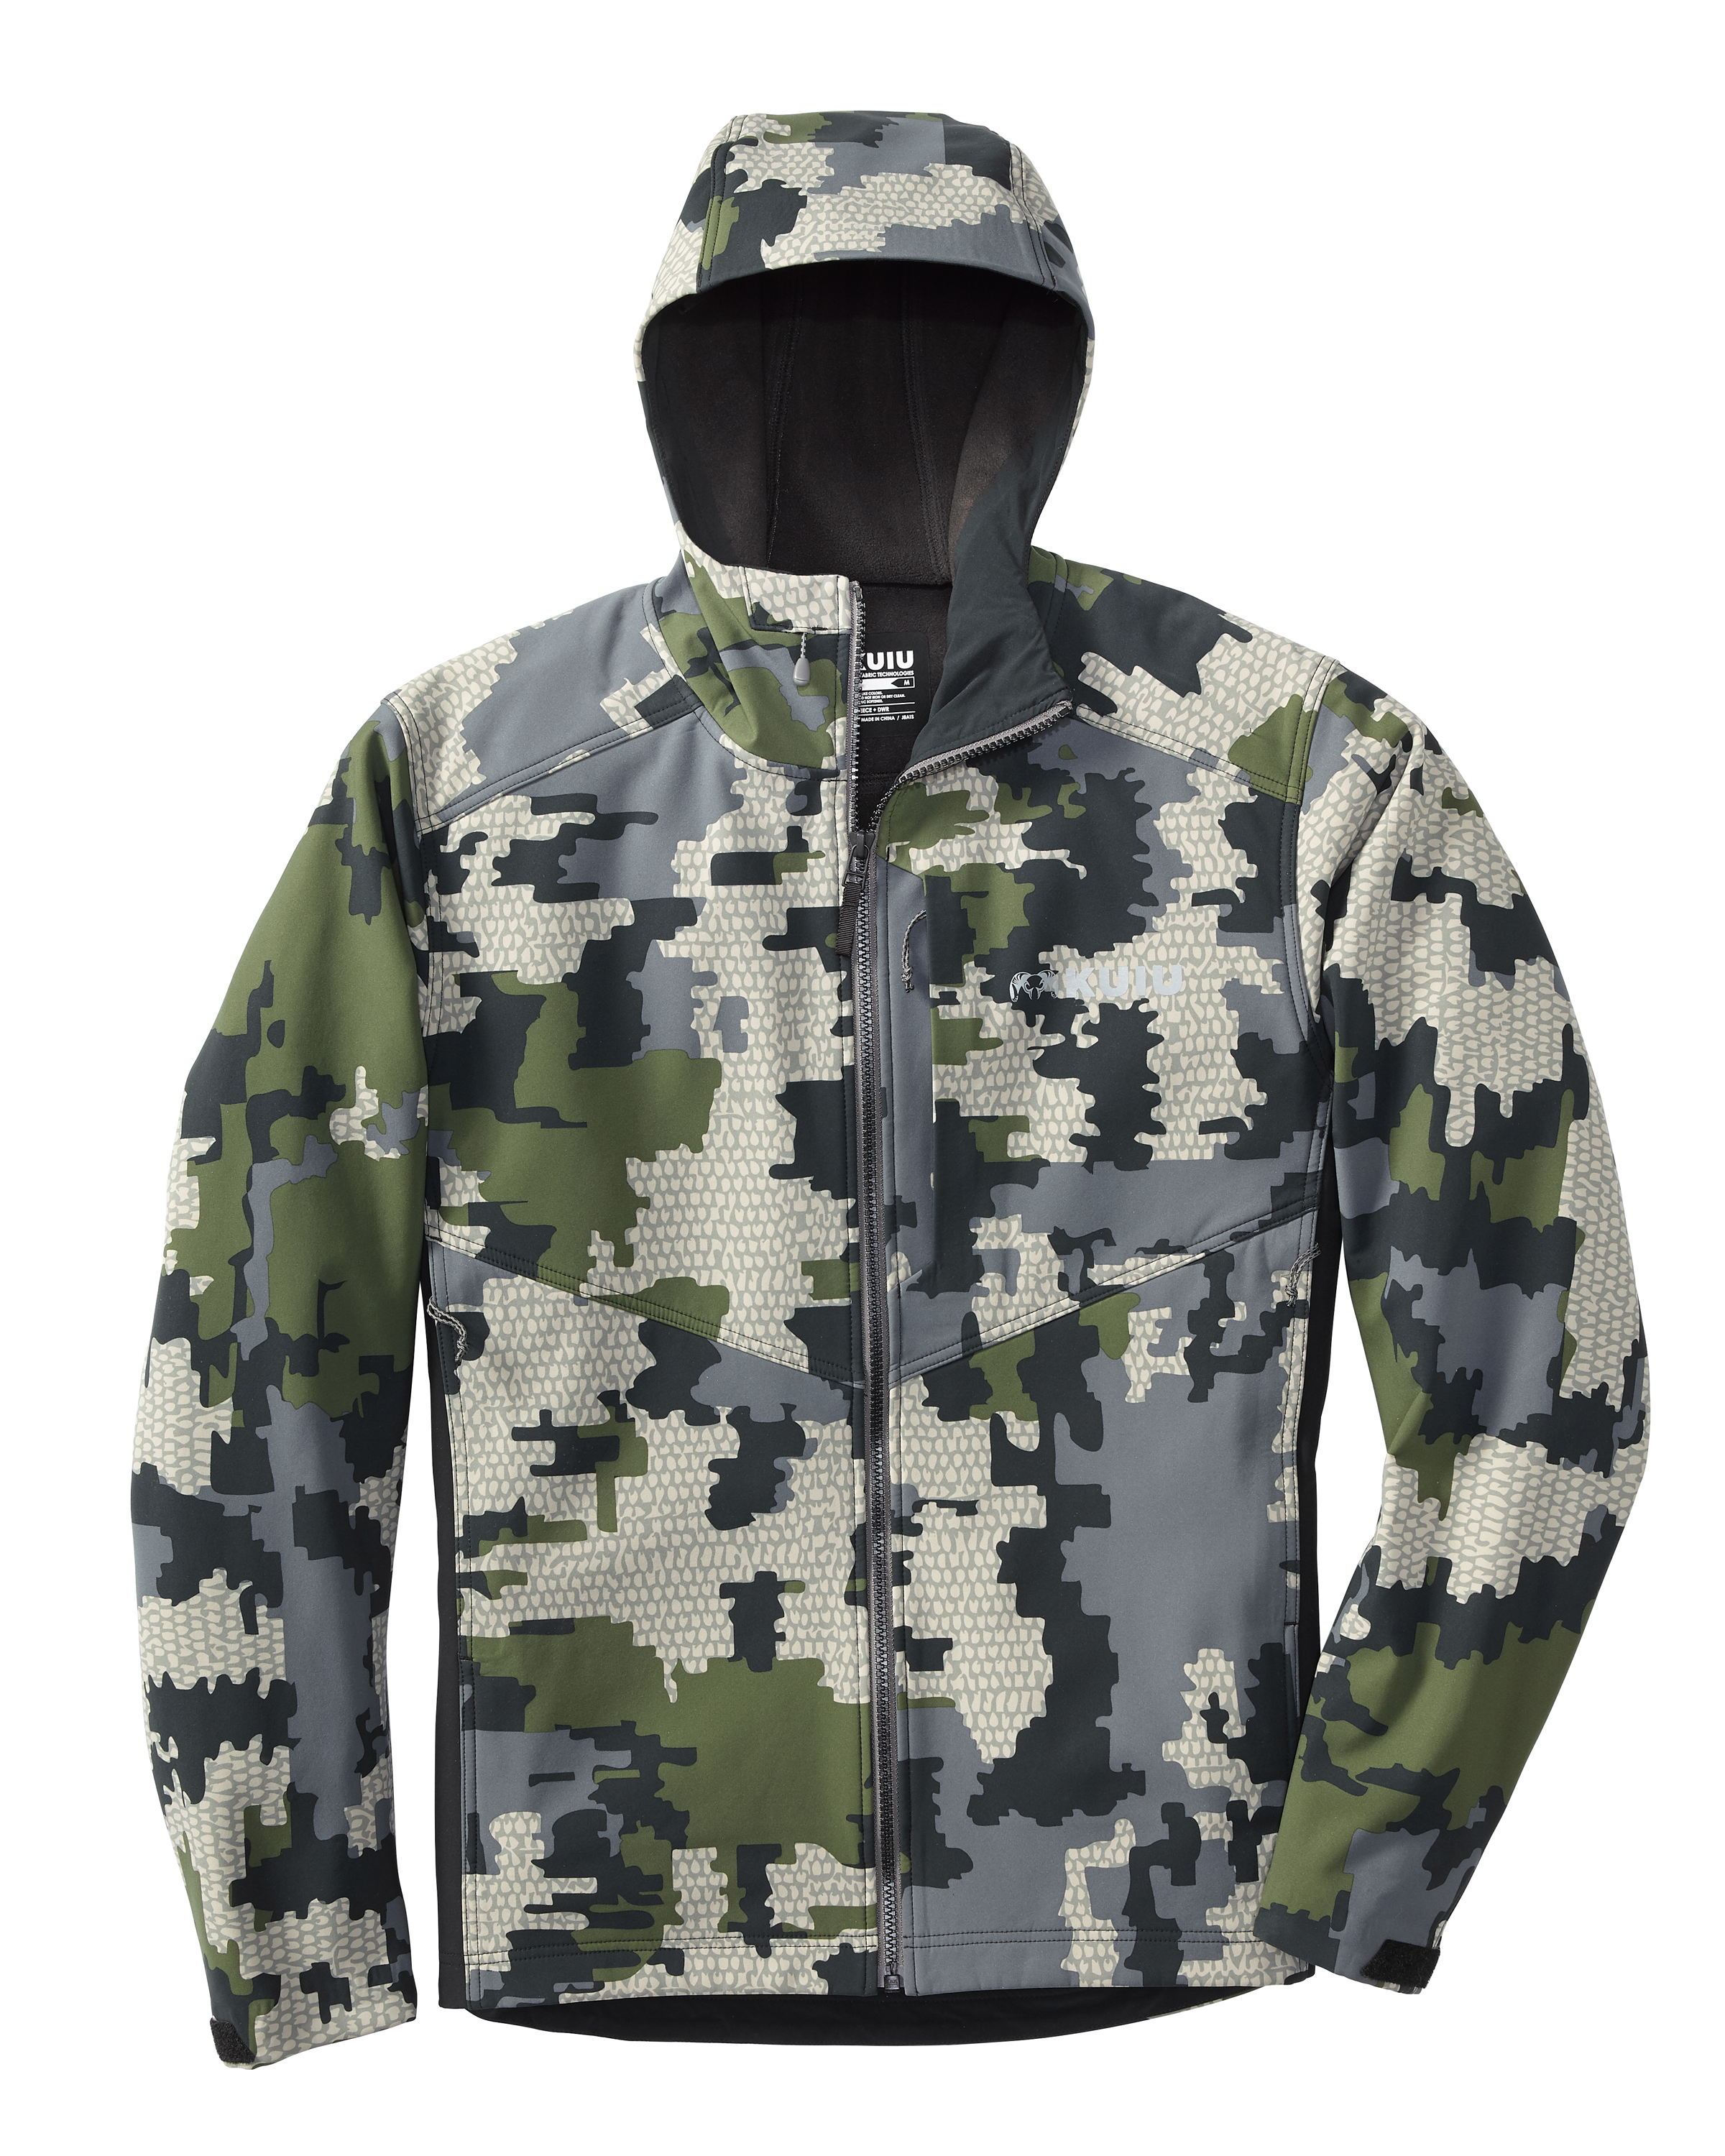 KUIU Rubicon Hooded Hunting Jacket in Verde | Size Small